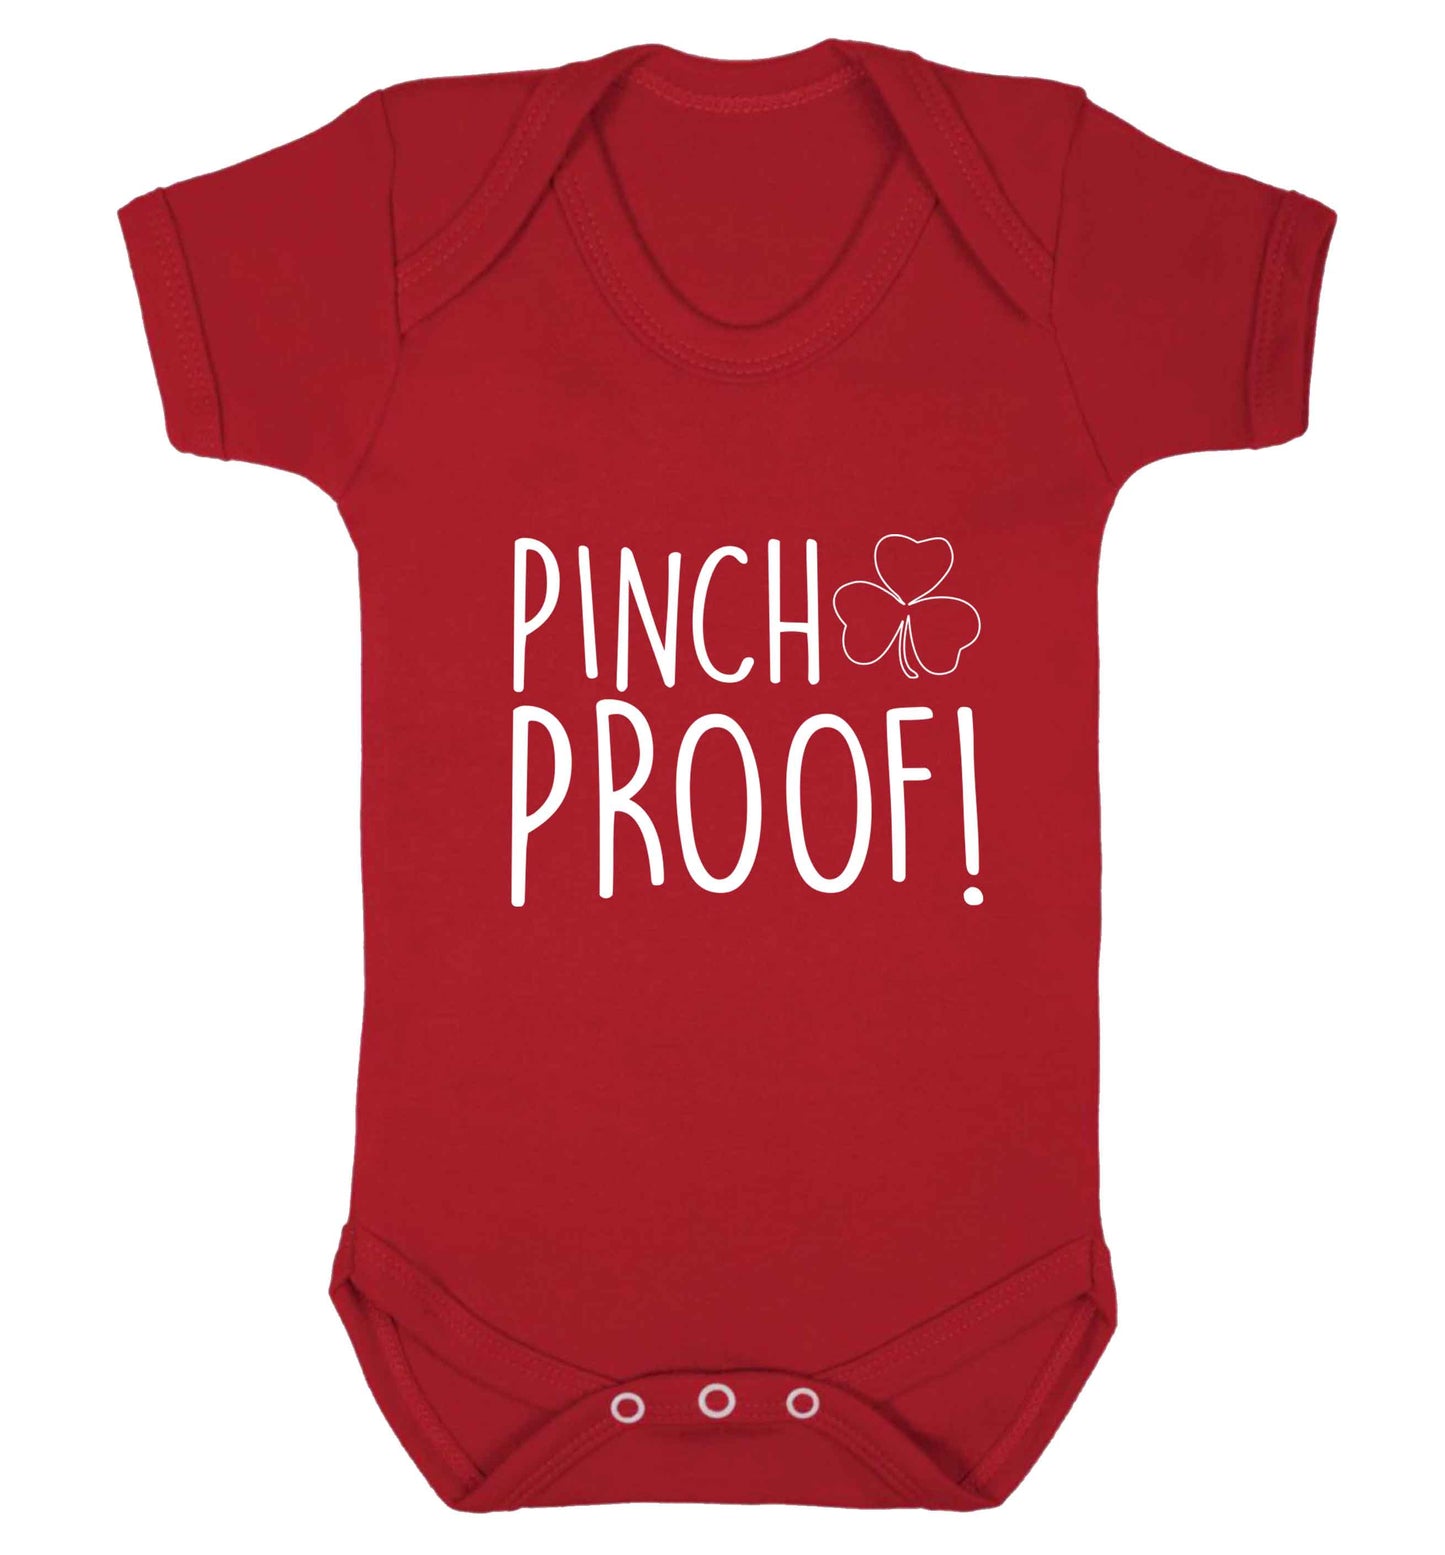 Pinch Proof baby vest red 18-24 months